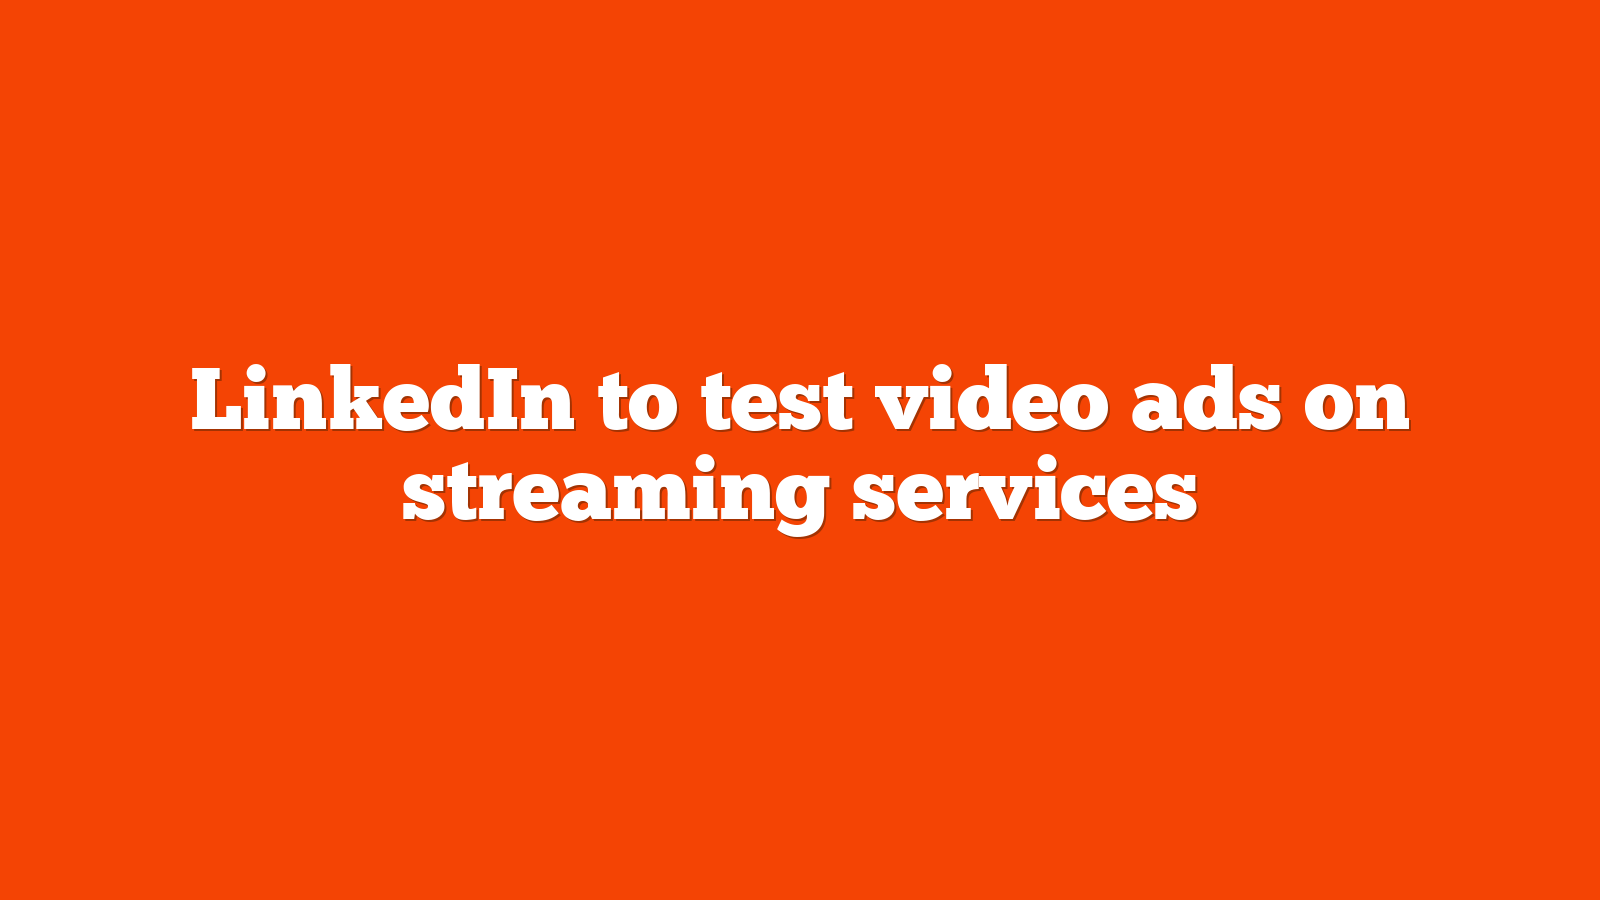 LinkedIn to test video ads on streaming services